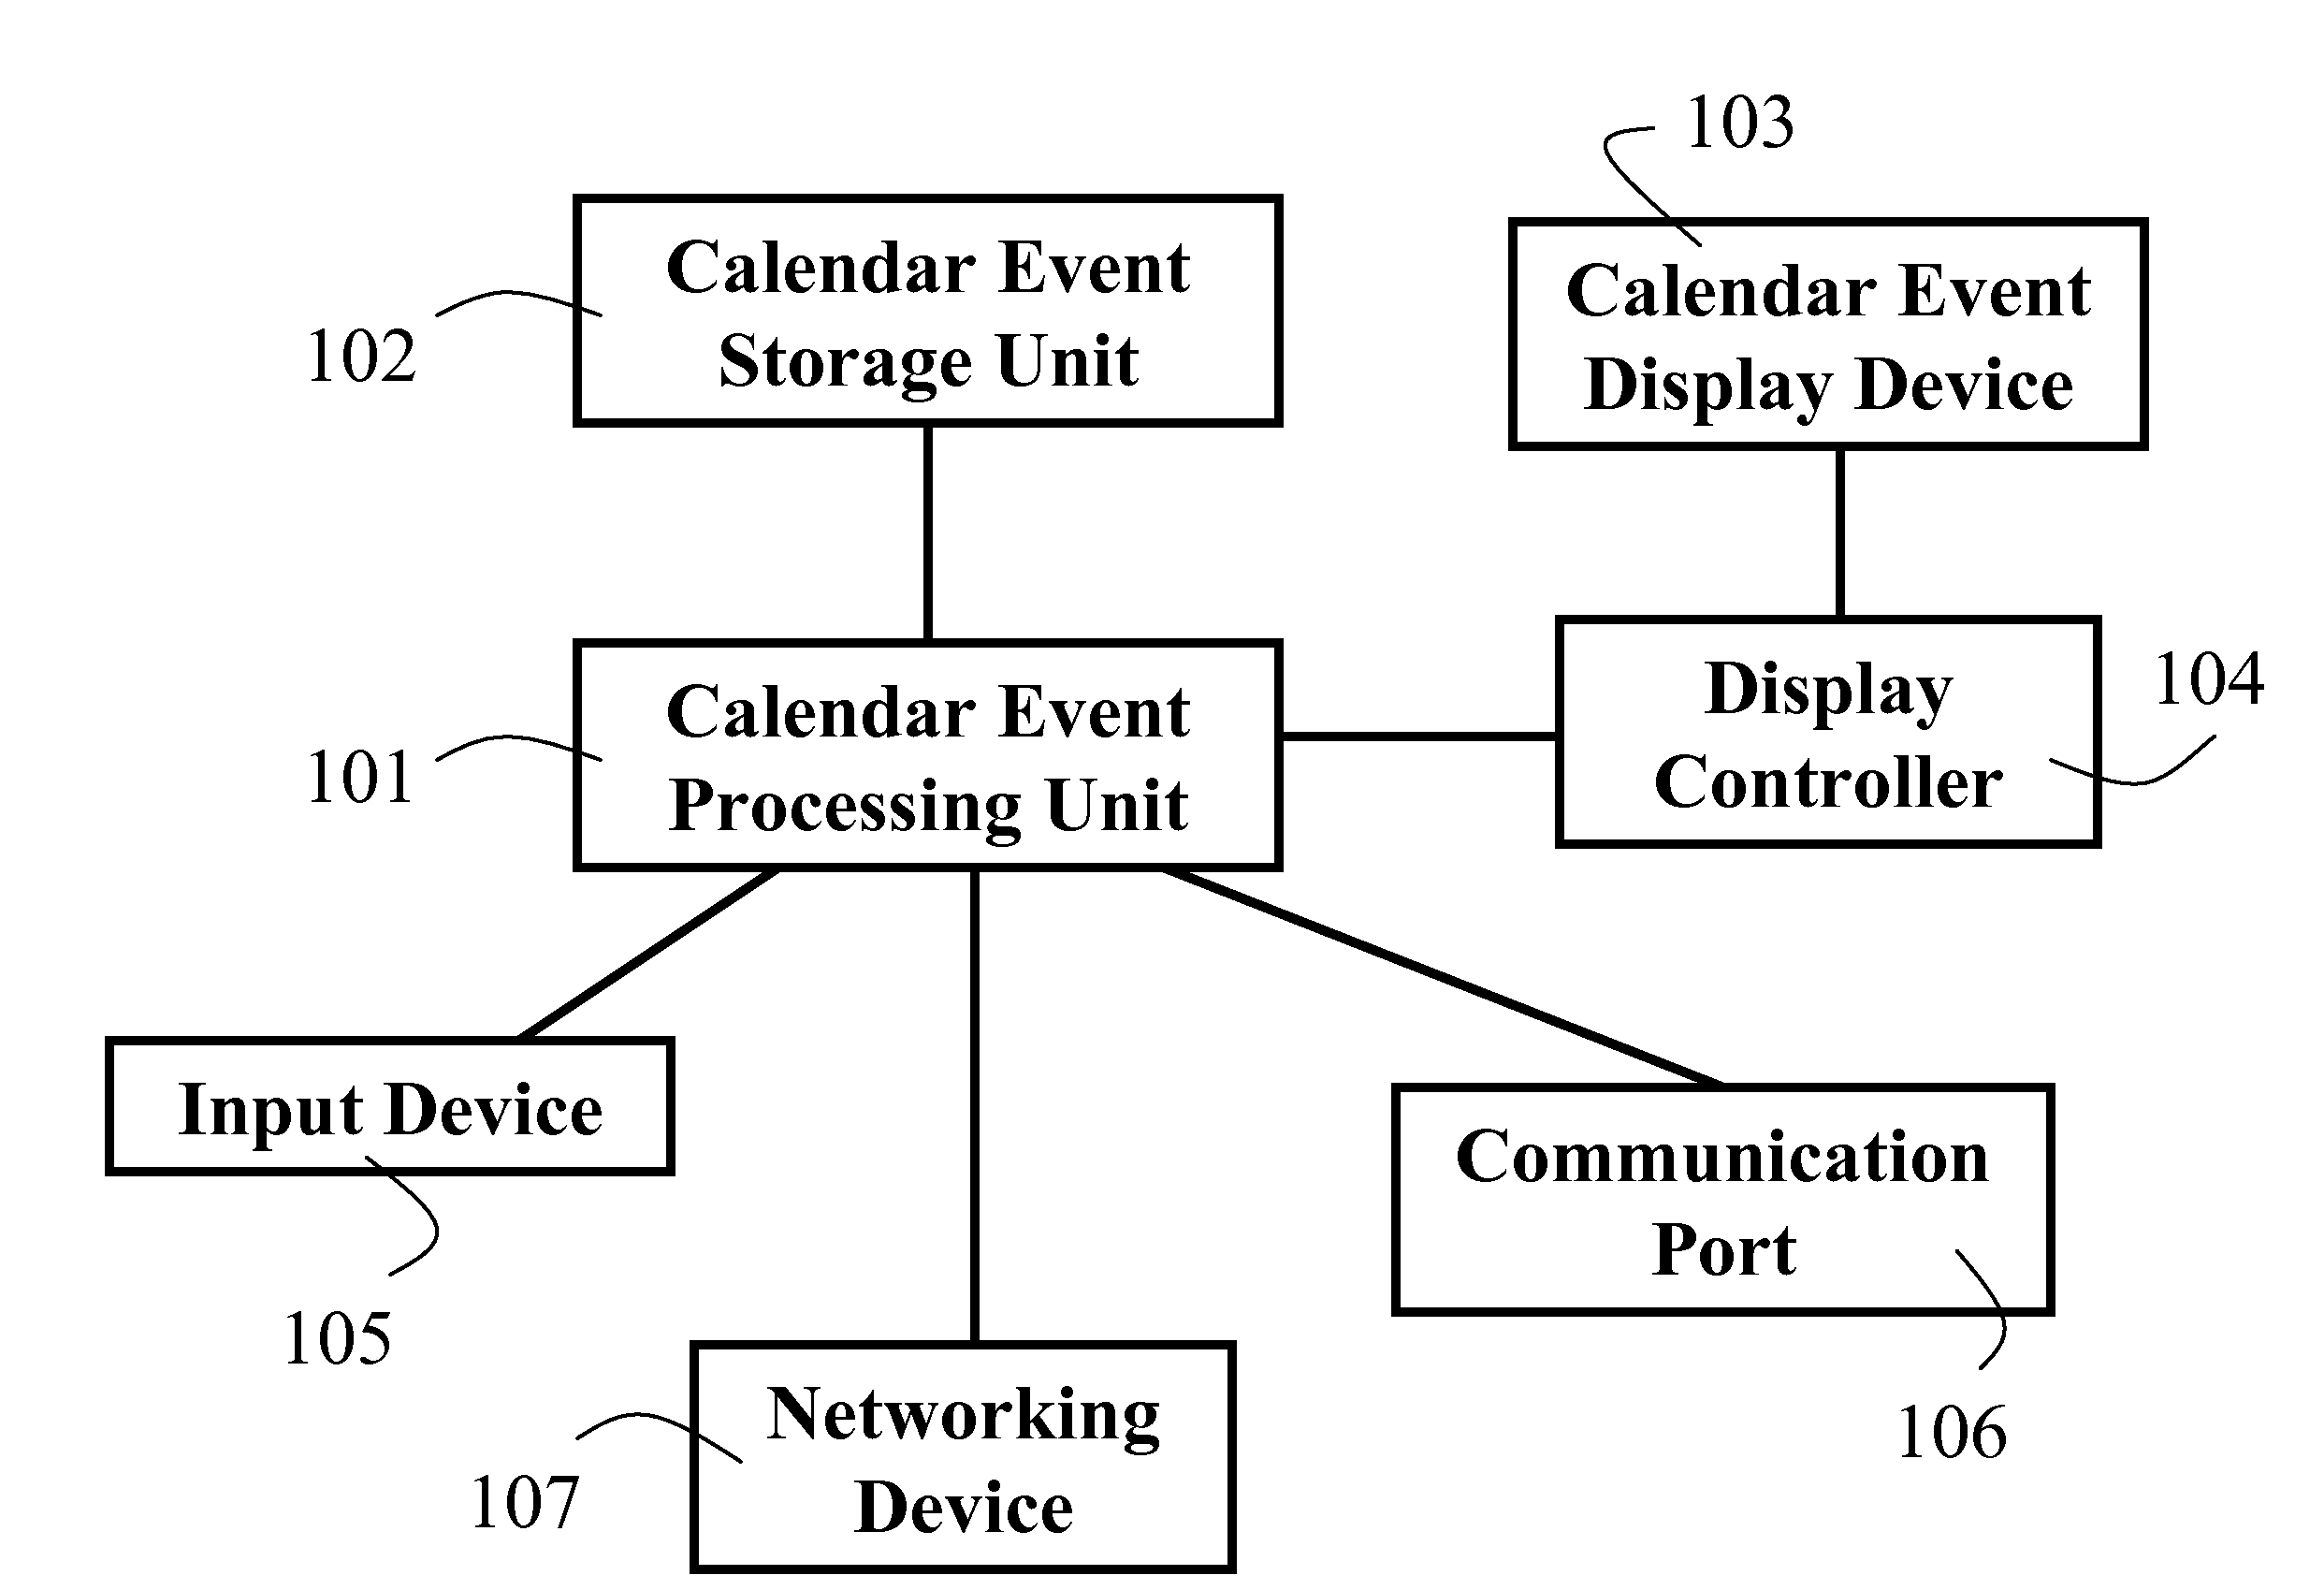 Method And Apparatus Of On-Site Display For Showing Calendar Events Of A Conference Room